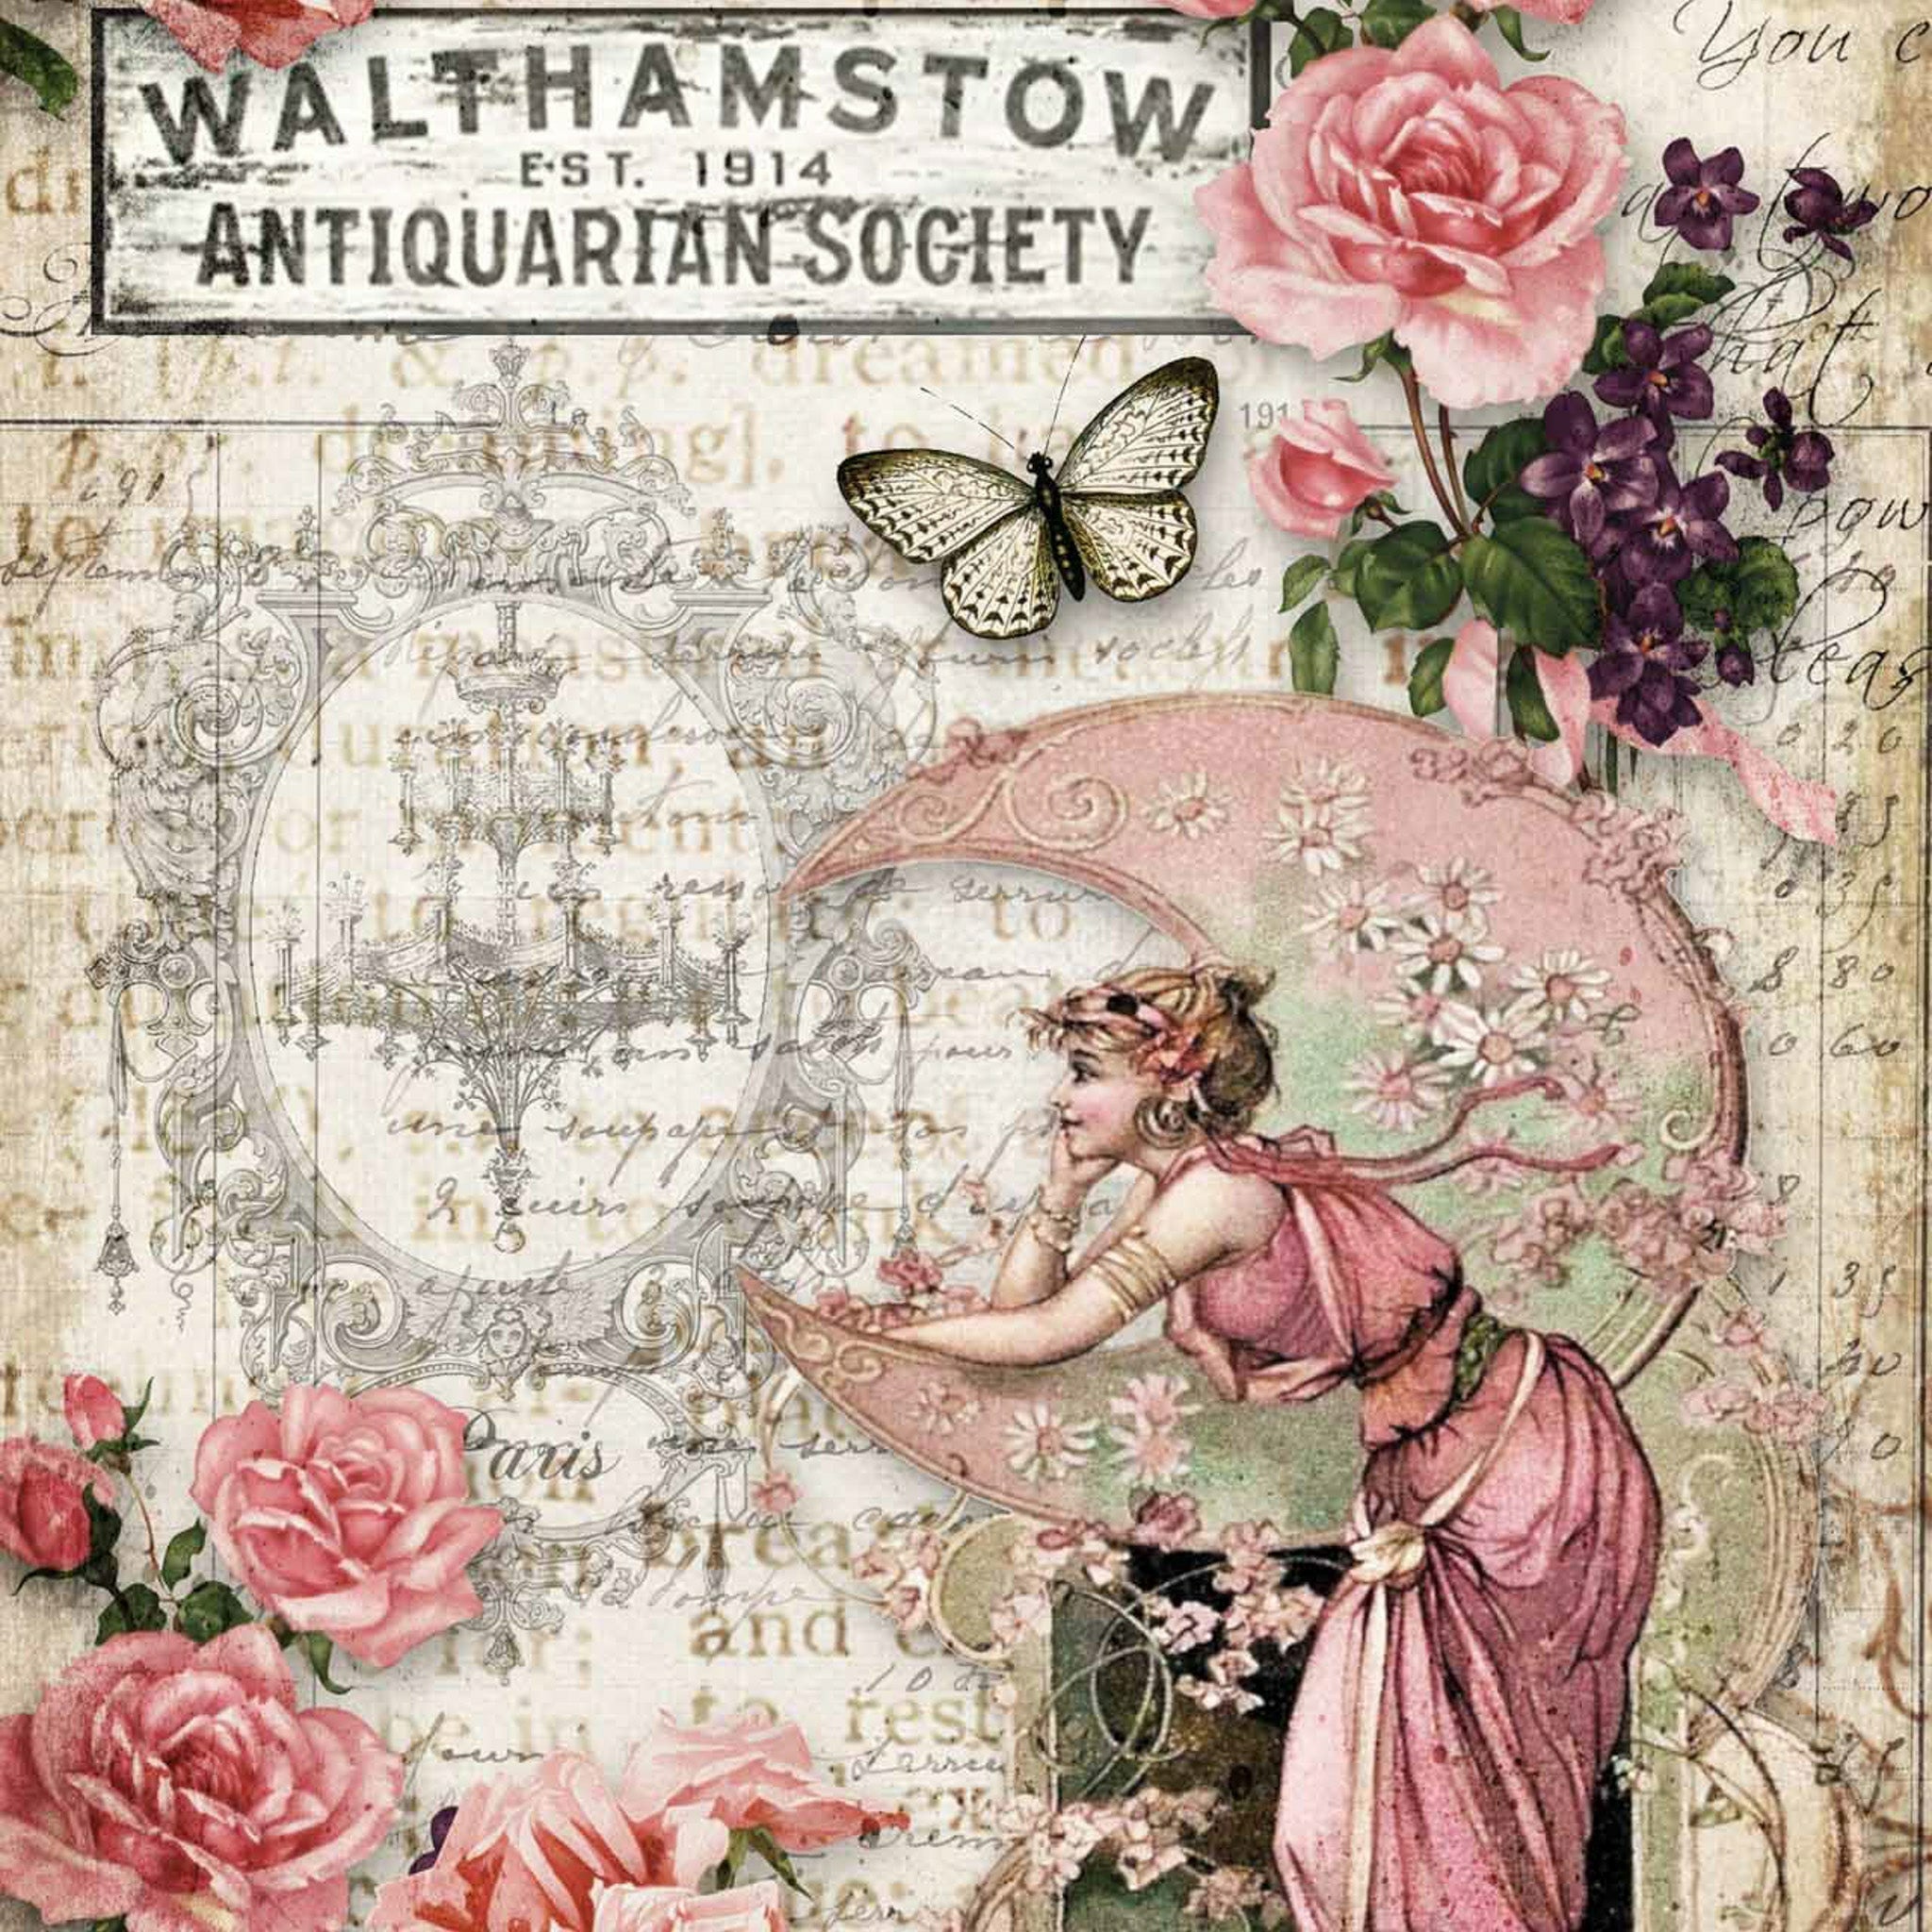 Close-up of an A0 rice paper design that features vintage parchment with writing, large pink roses, a butterfly, vintage signs, and a woman in a pink dress resting on a pale pink crescent moon.